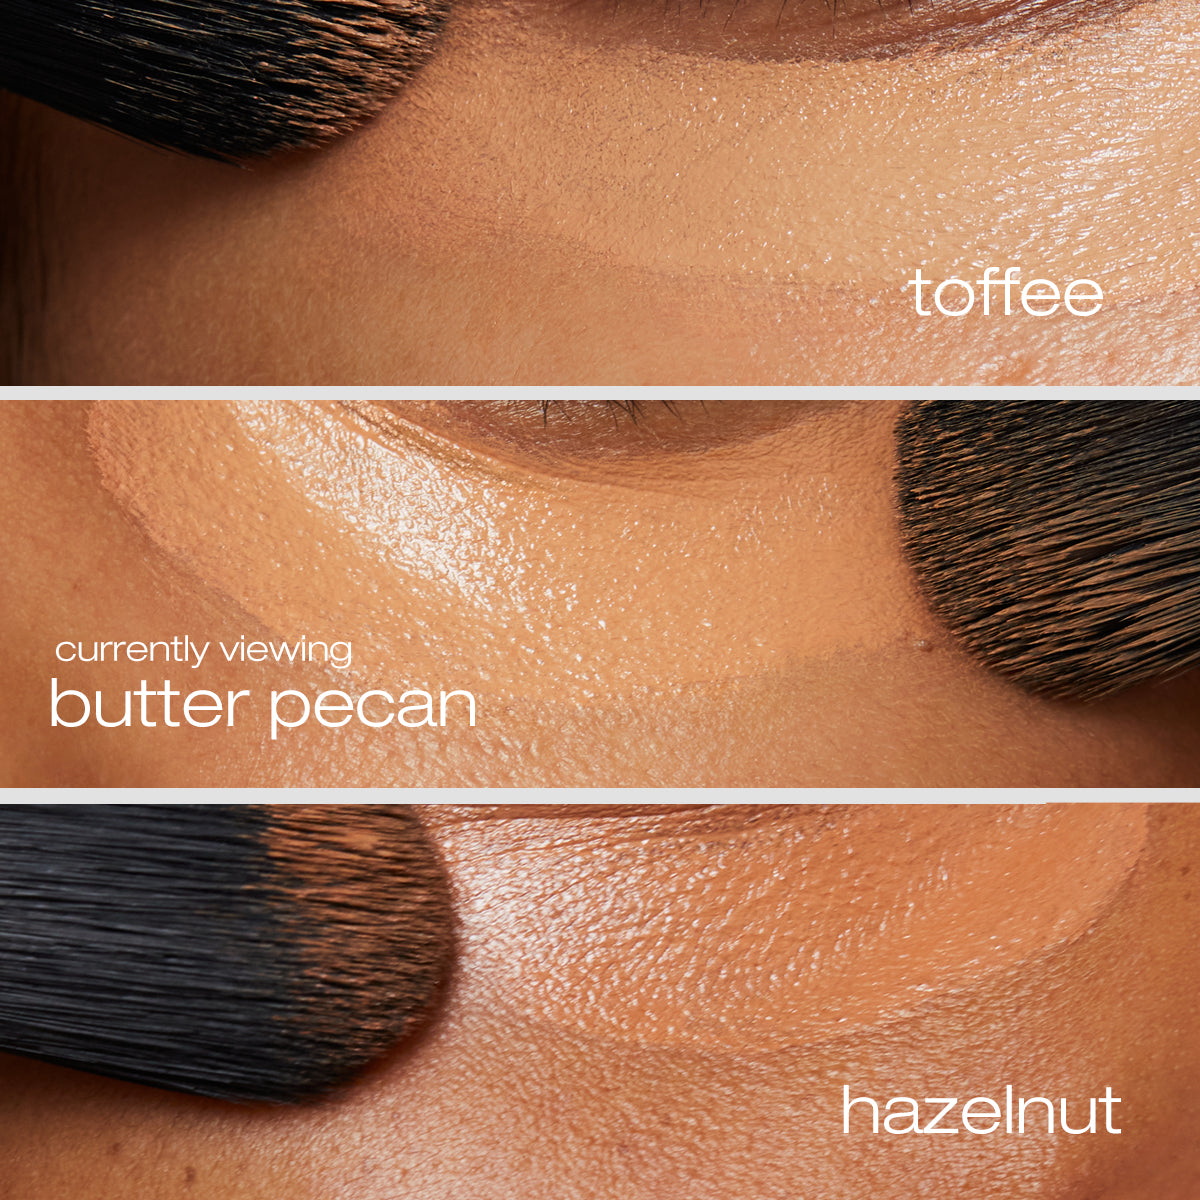 Toffee, butter pecan, and hazelnut applied to undereye